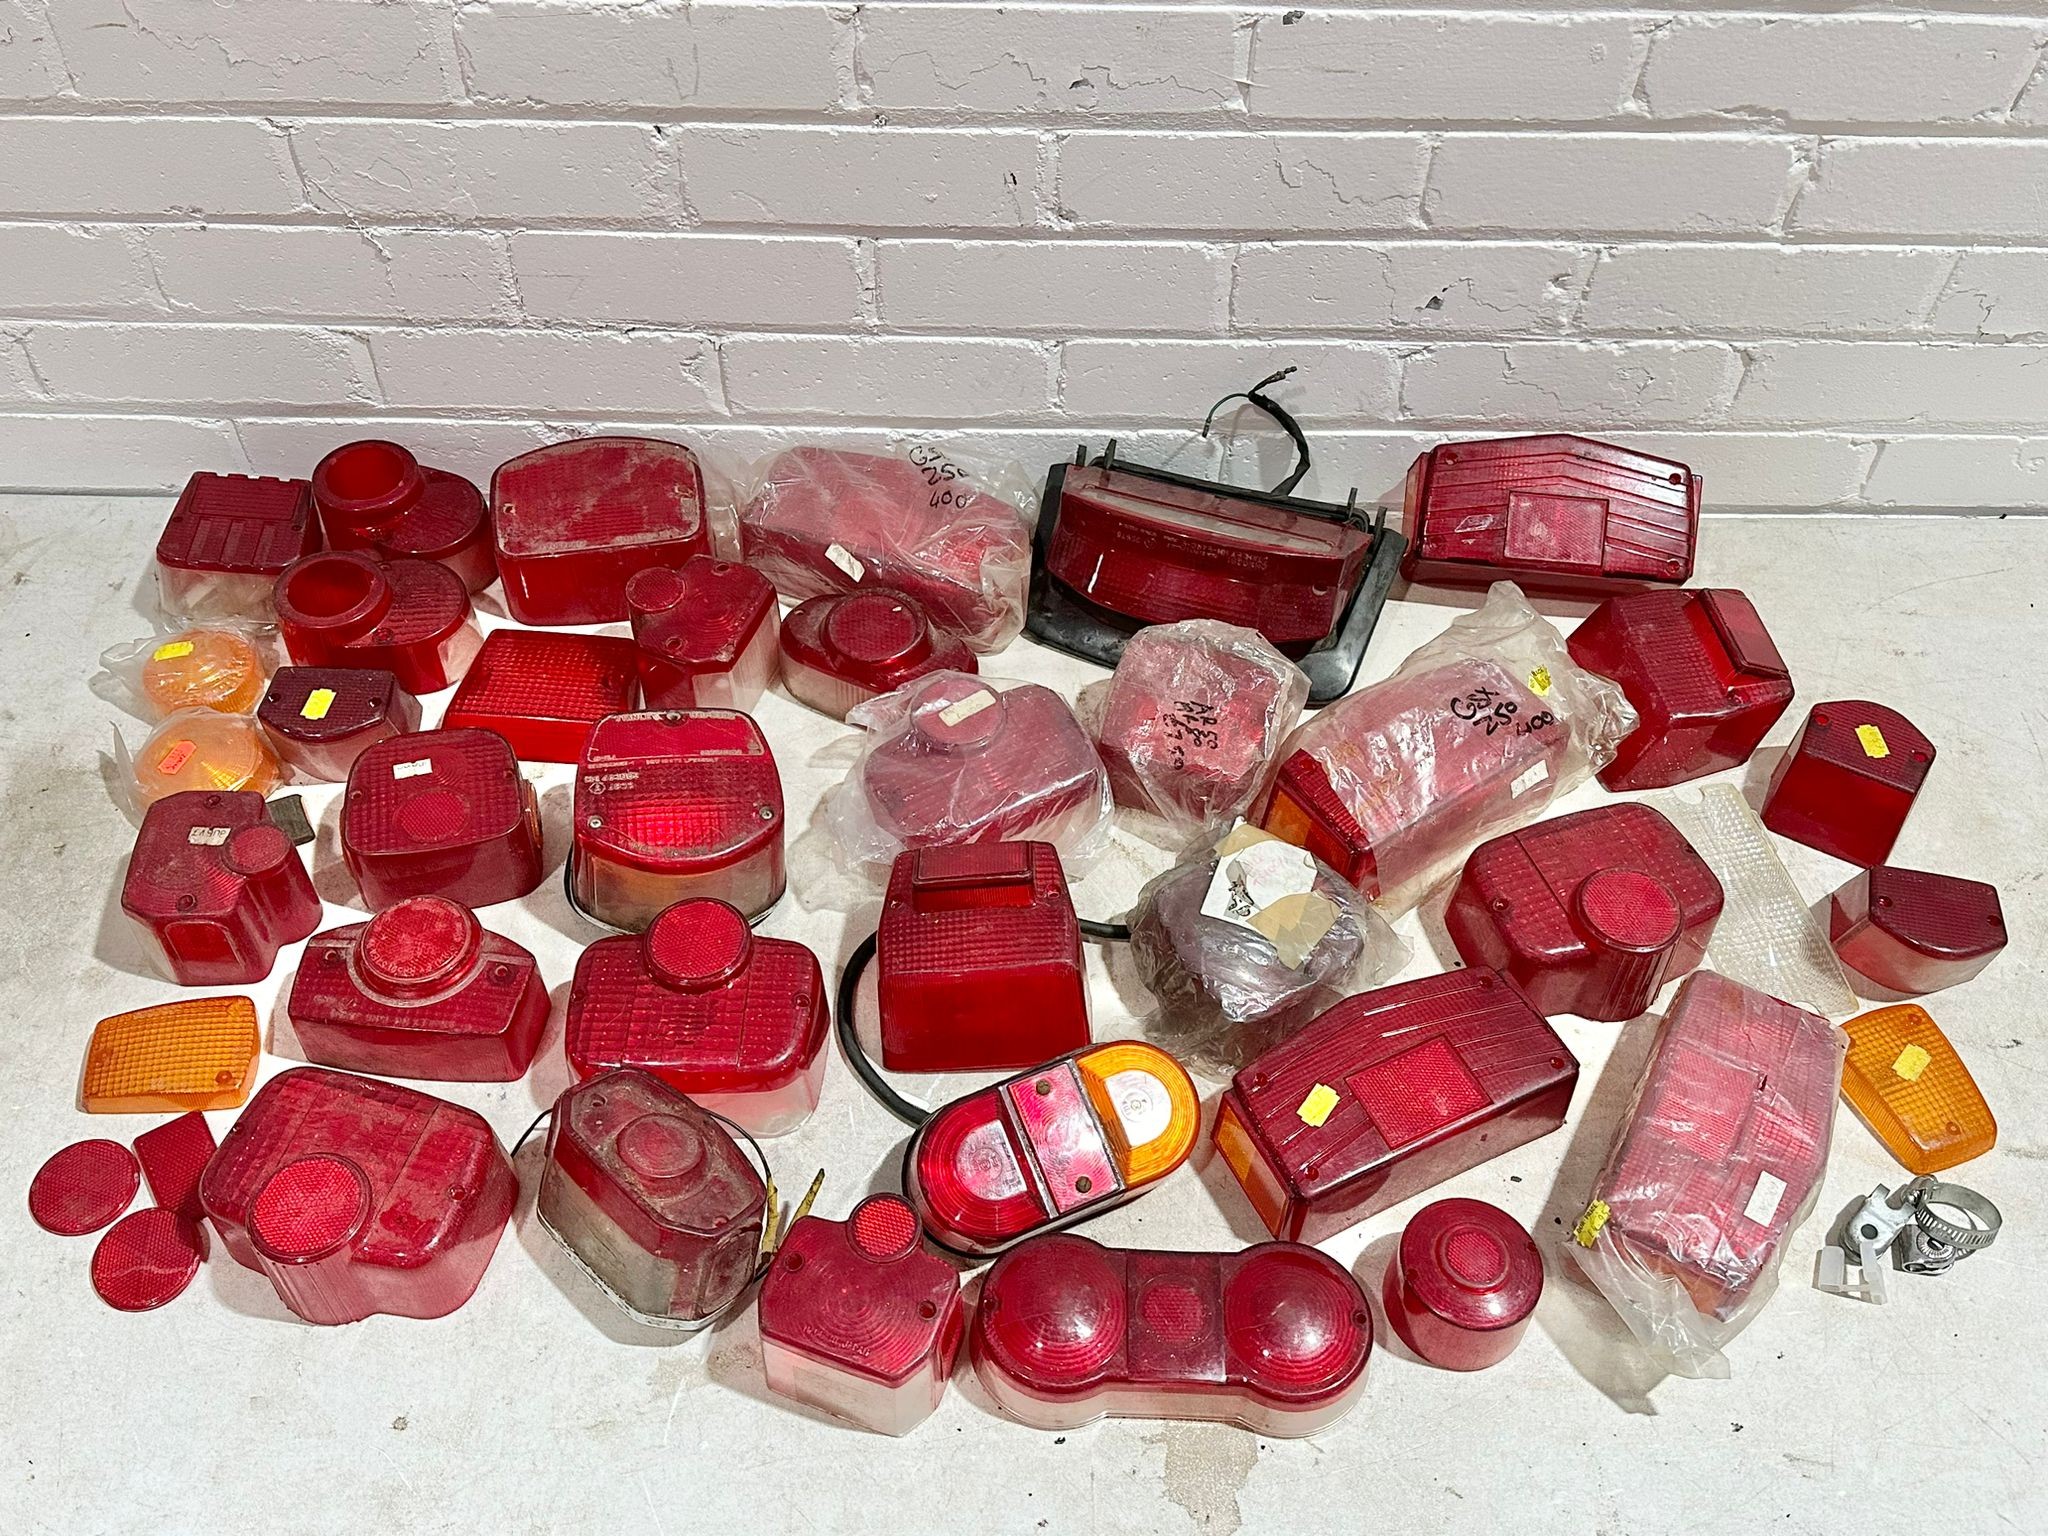 A quantity of motorbike tail lights